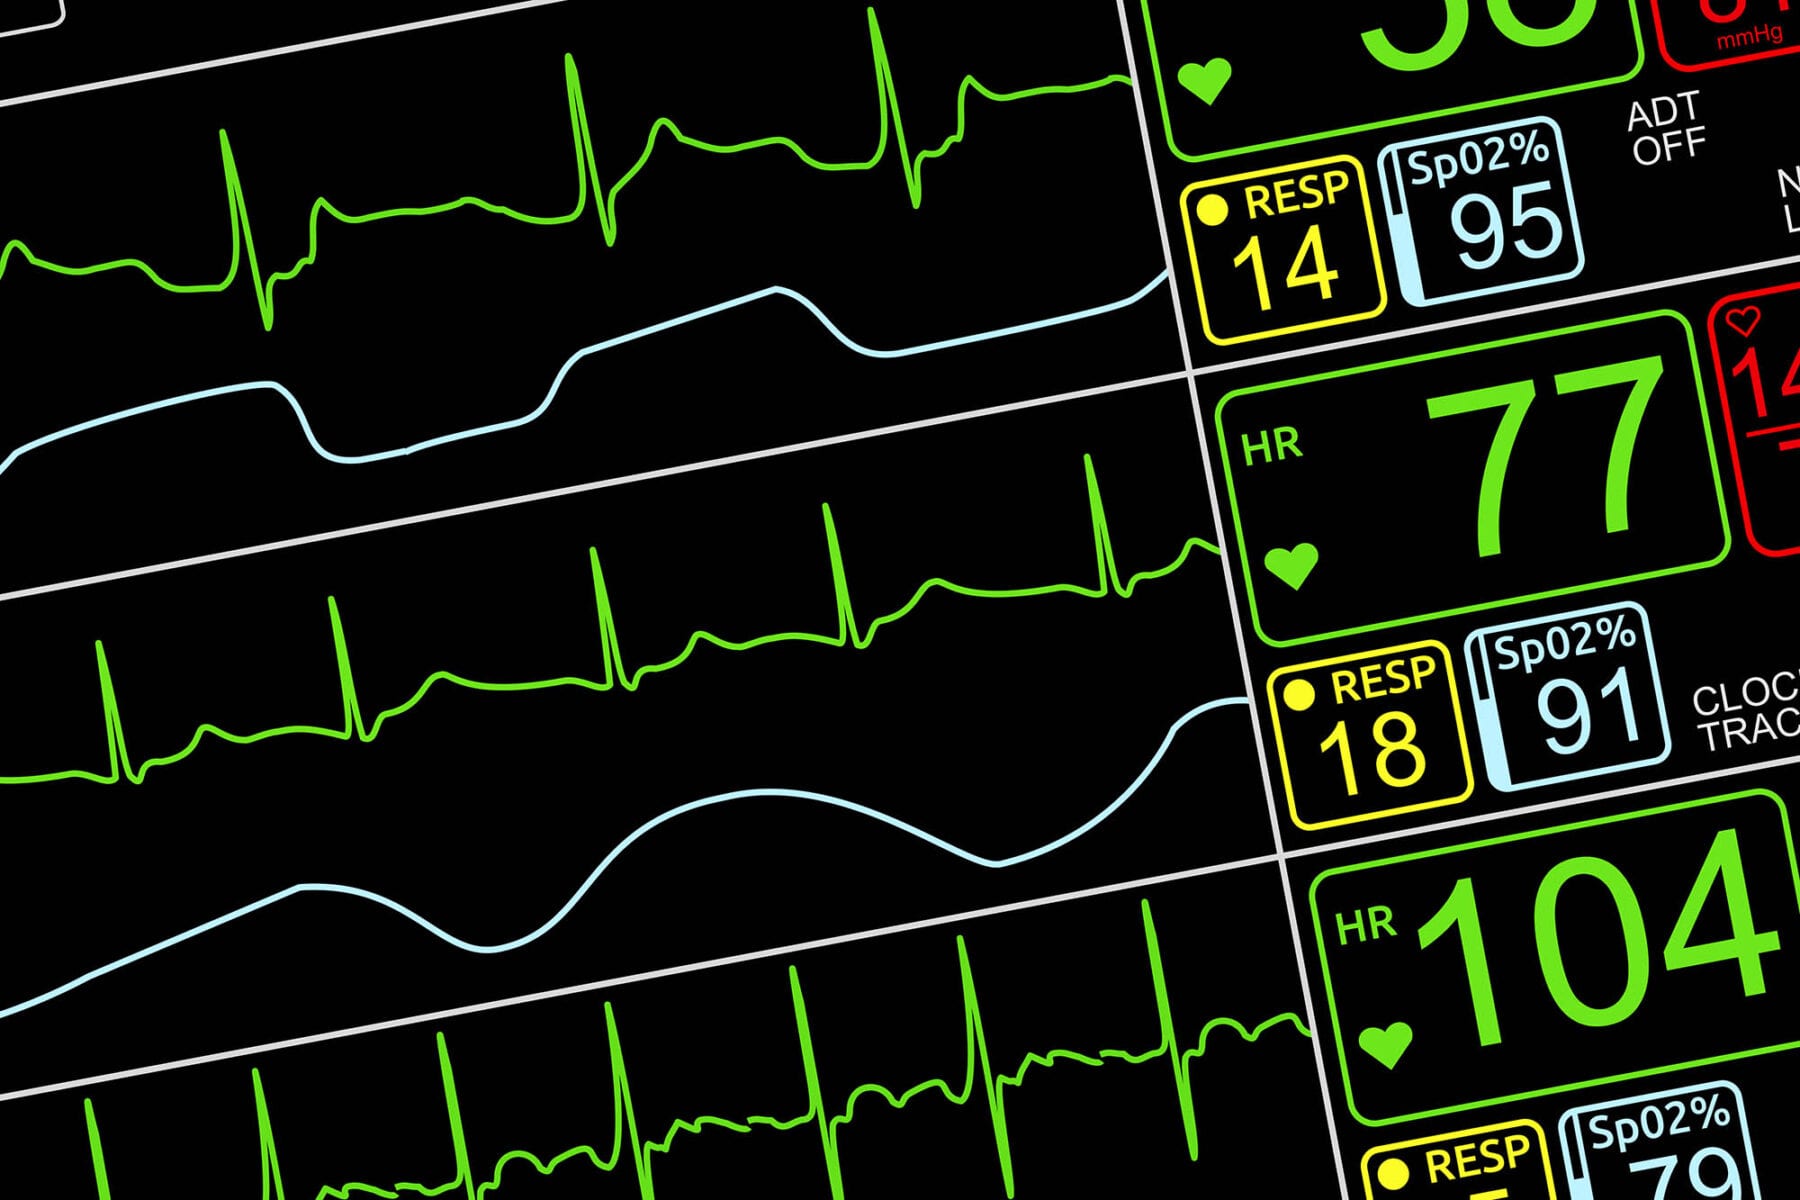 Patient's vital signs on ICU monitor, isolated closeup, dutched left
via UVA